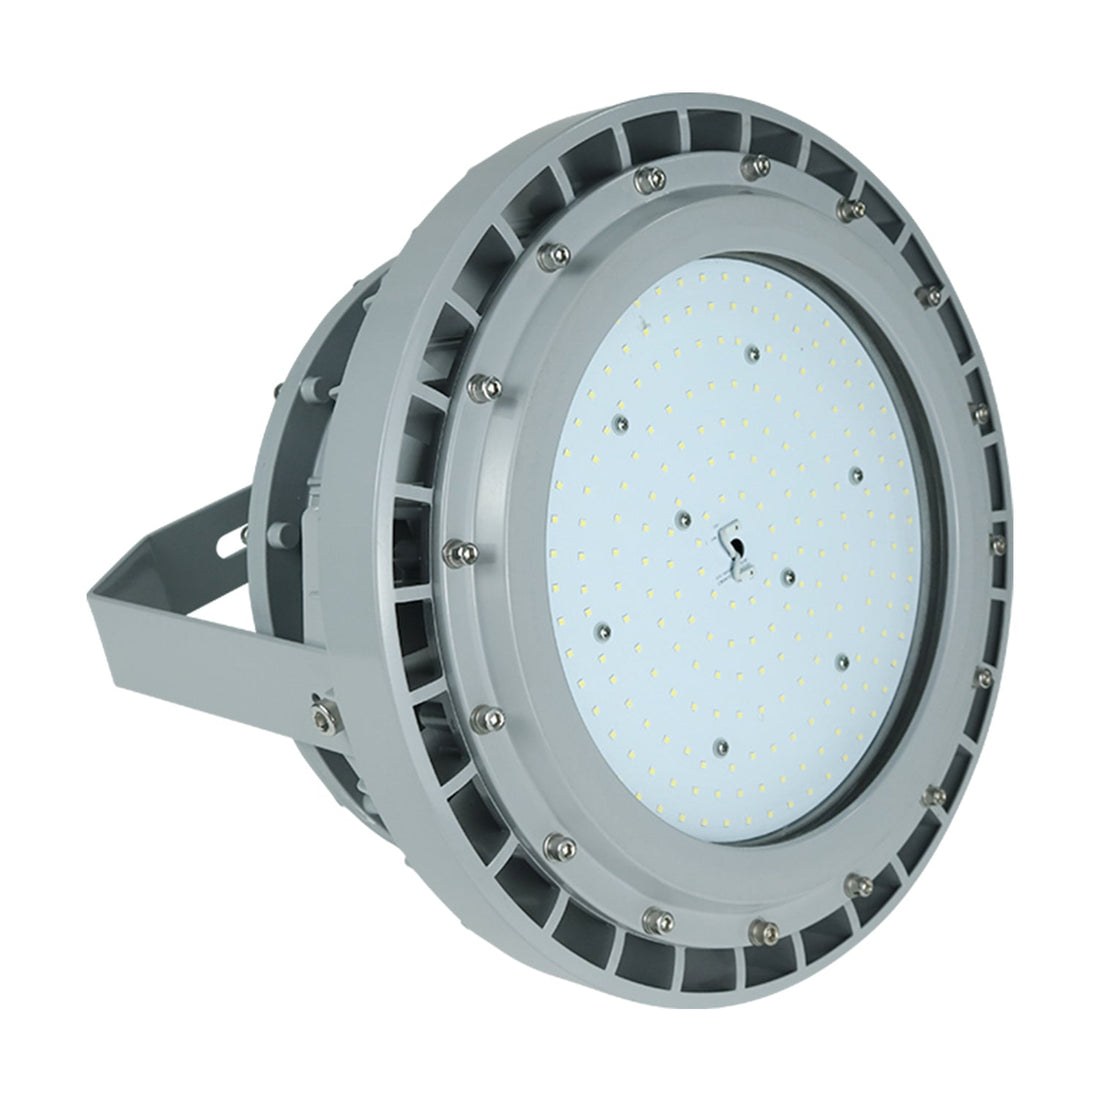 LED Explosion Proof Round High Bay Light - 250W - 5000K, 32500LM, AC100-277V, IP66, Non Dimmable, Hazardous Location Lighting Fixtures